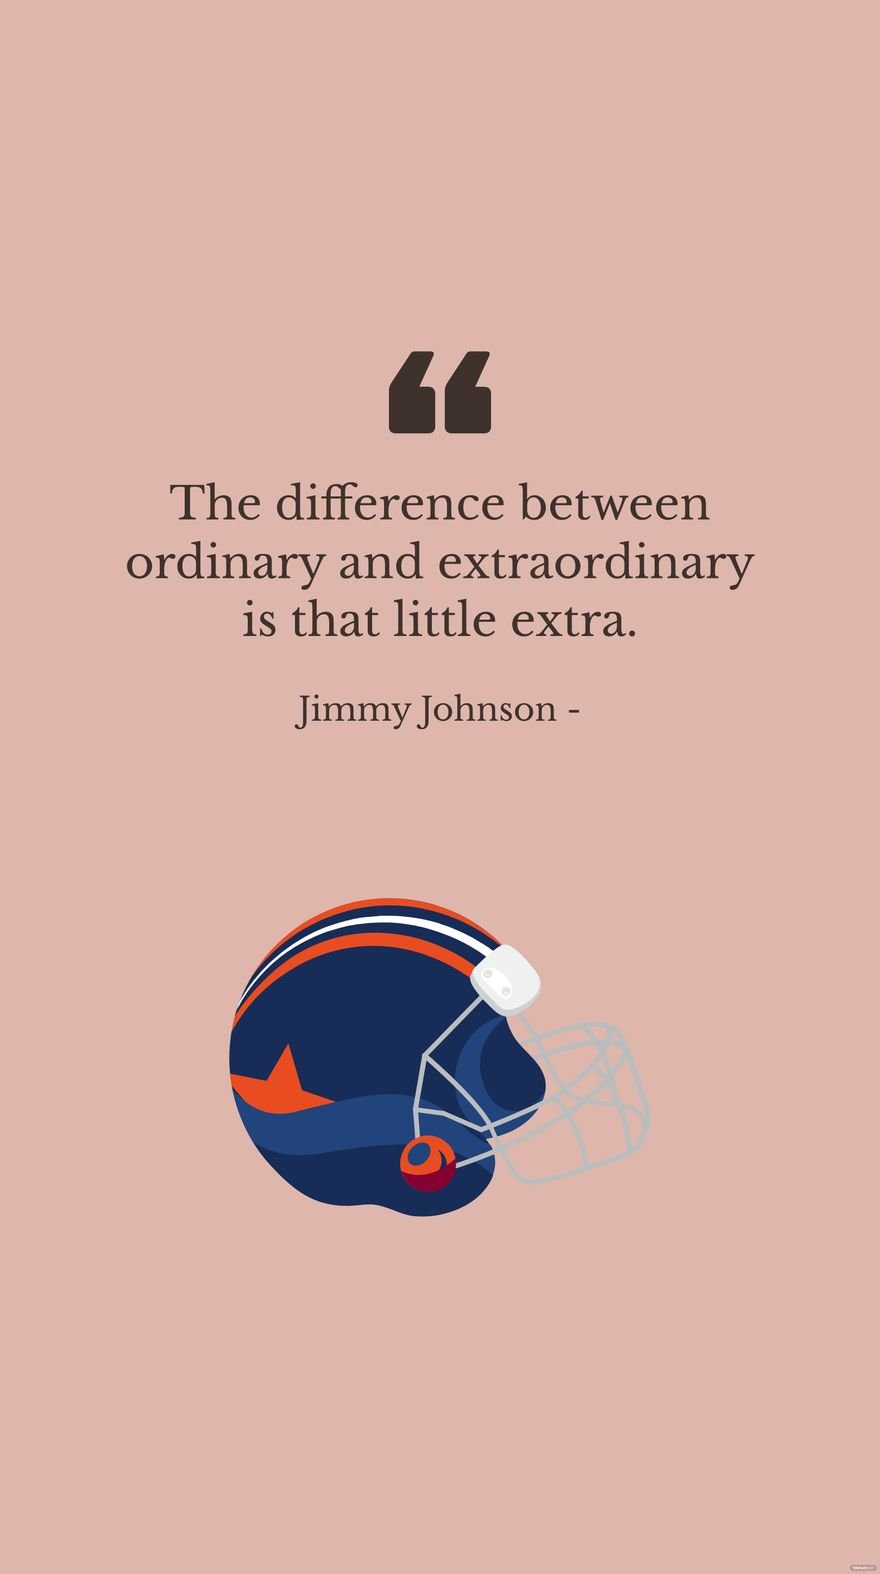 Jimmy Johnson - The difference between ordinary and extraordinary is that little extra.